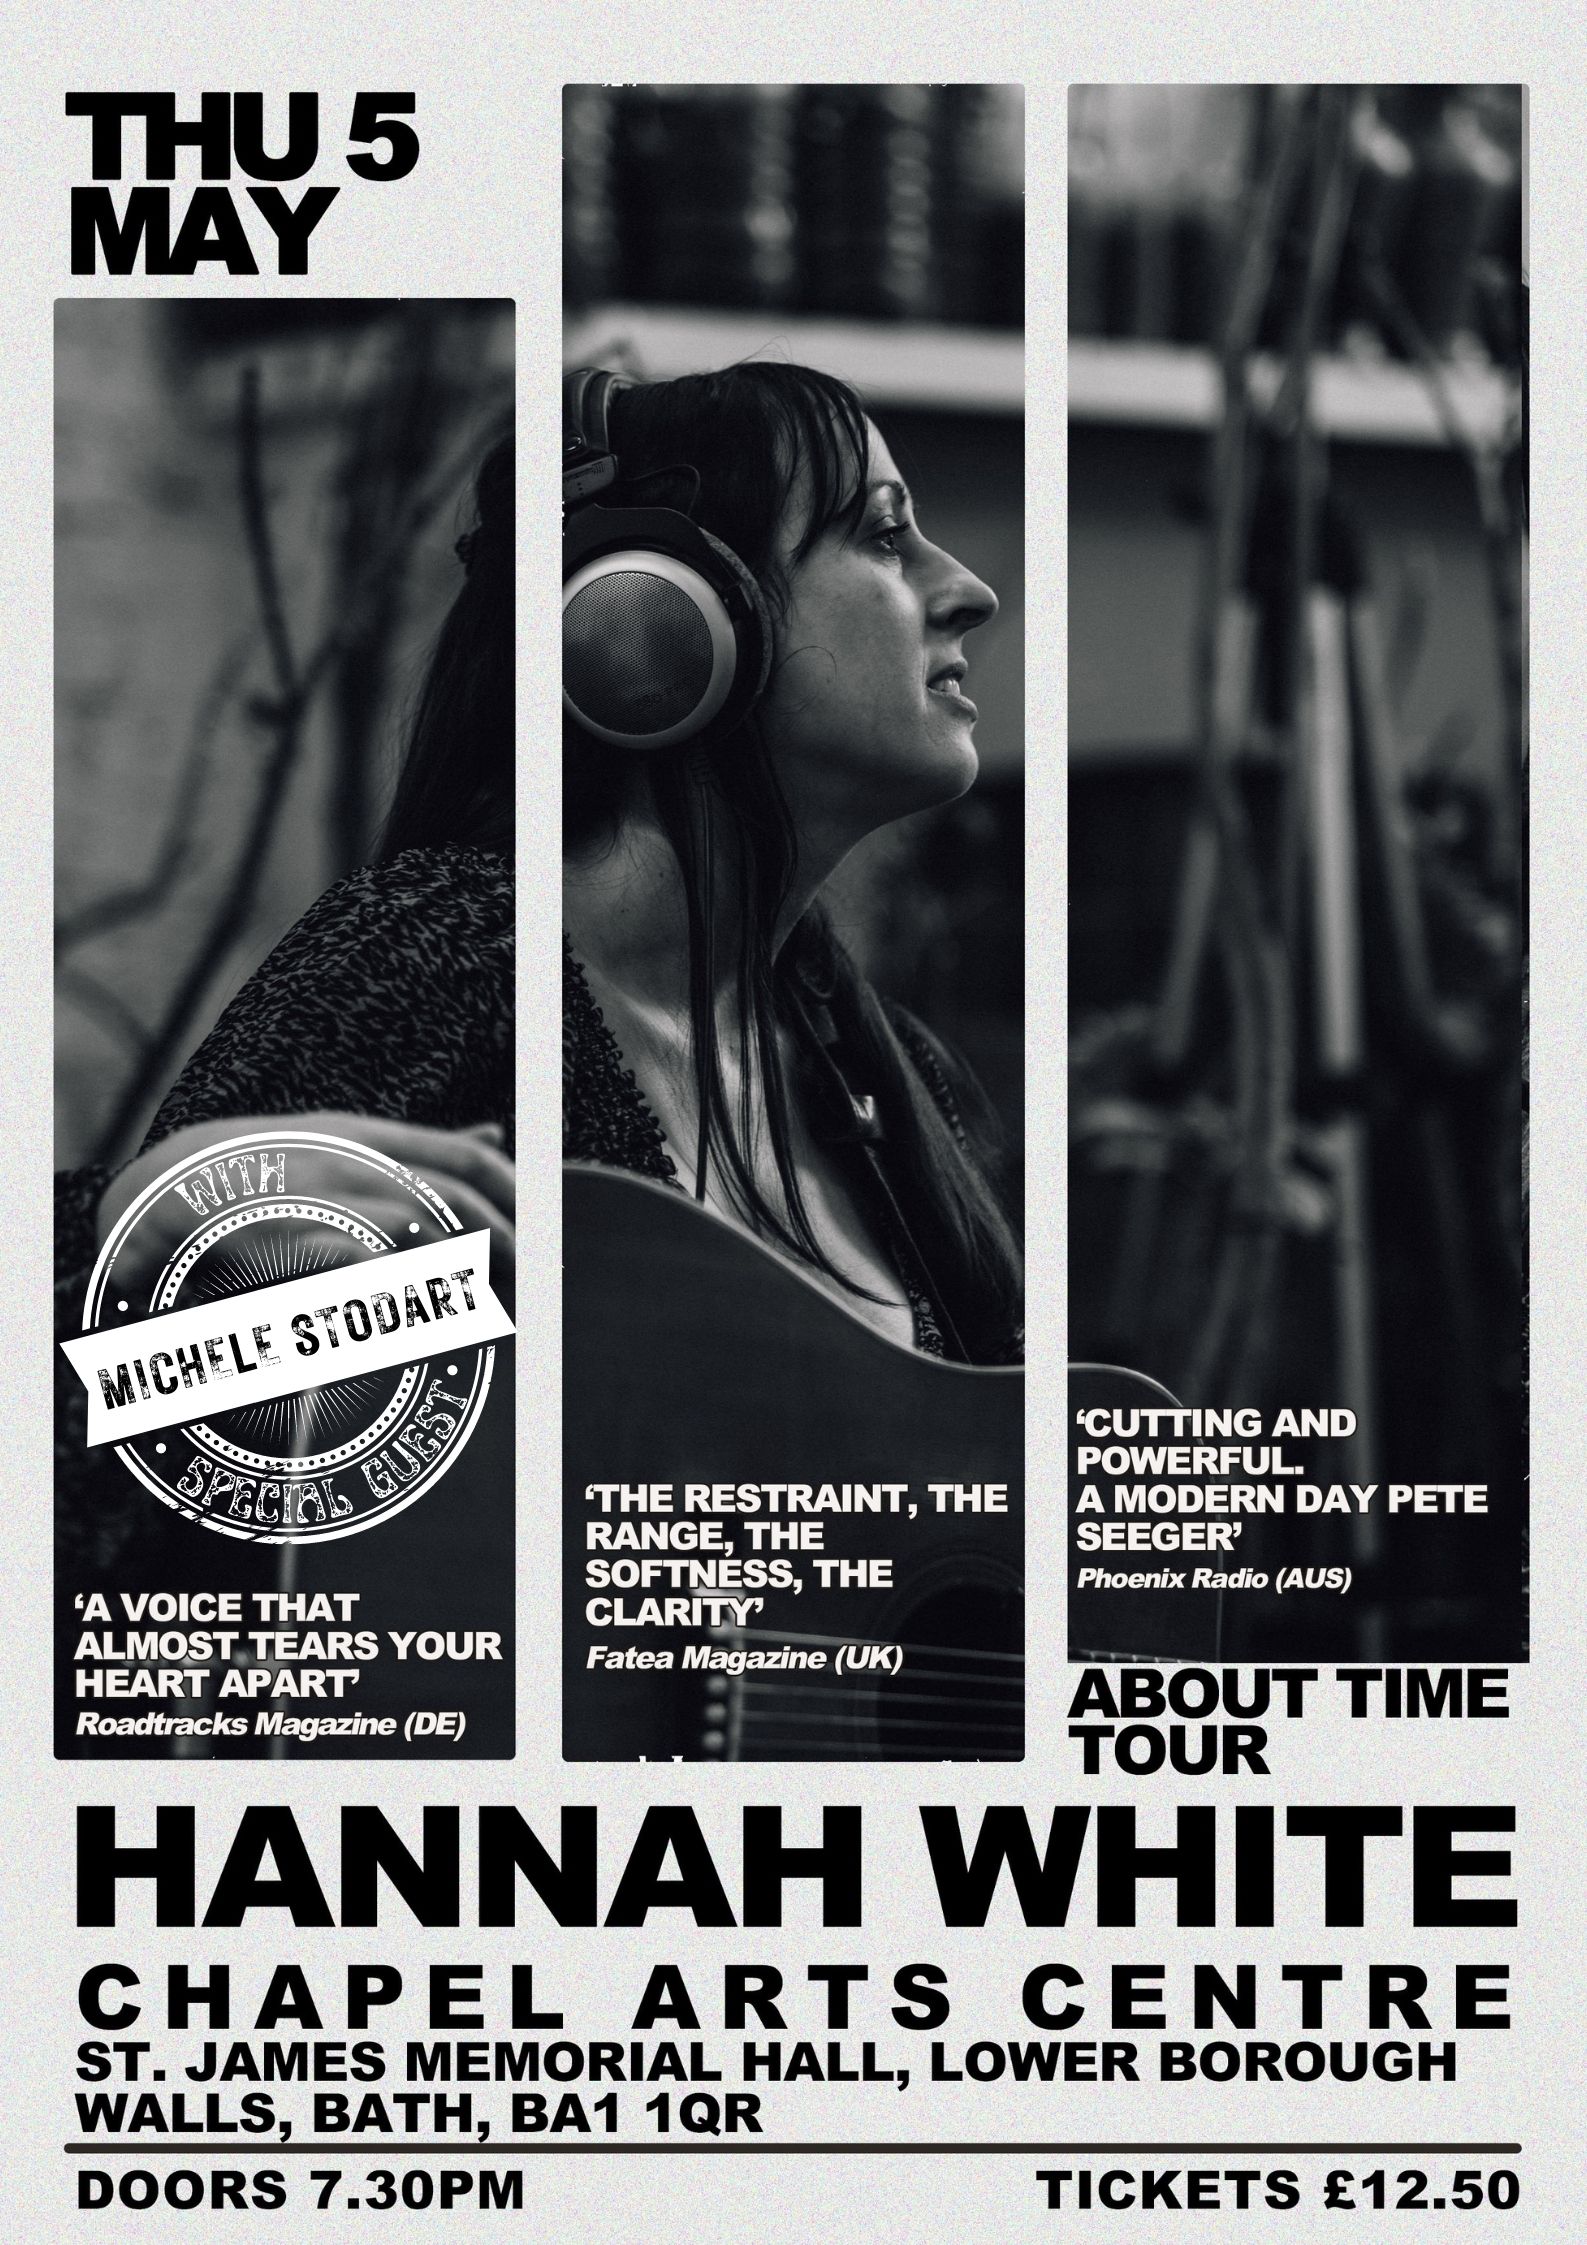 Hannah White (Band) with special guest Michele Stodart - Cancelled